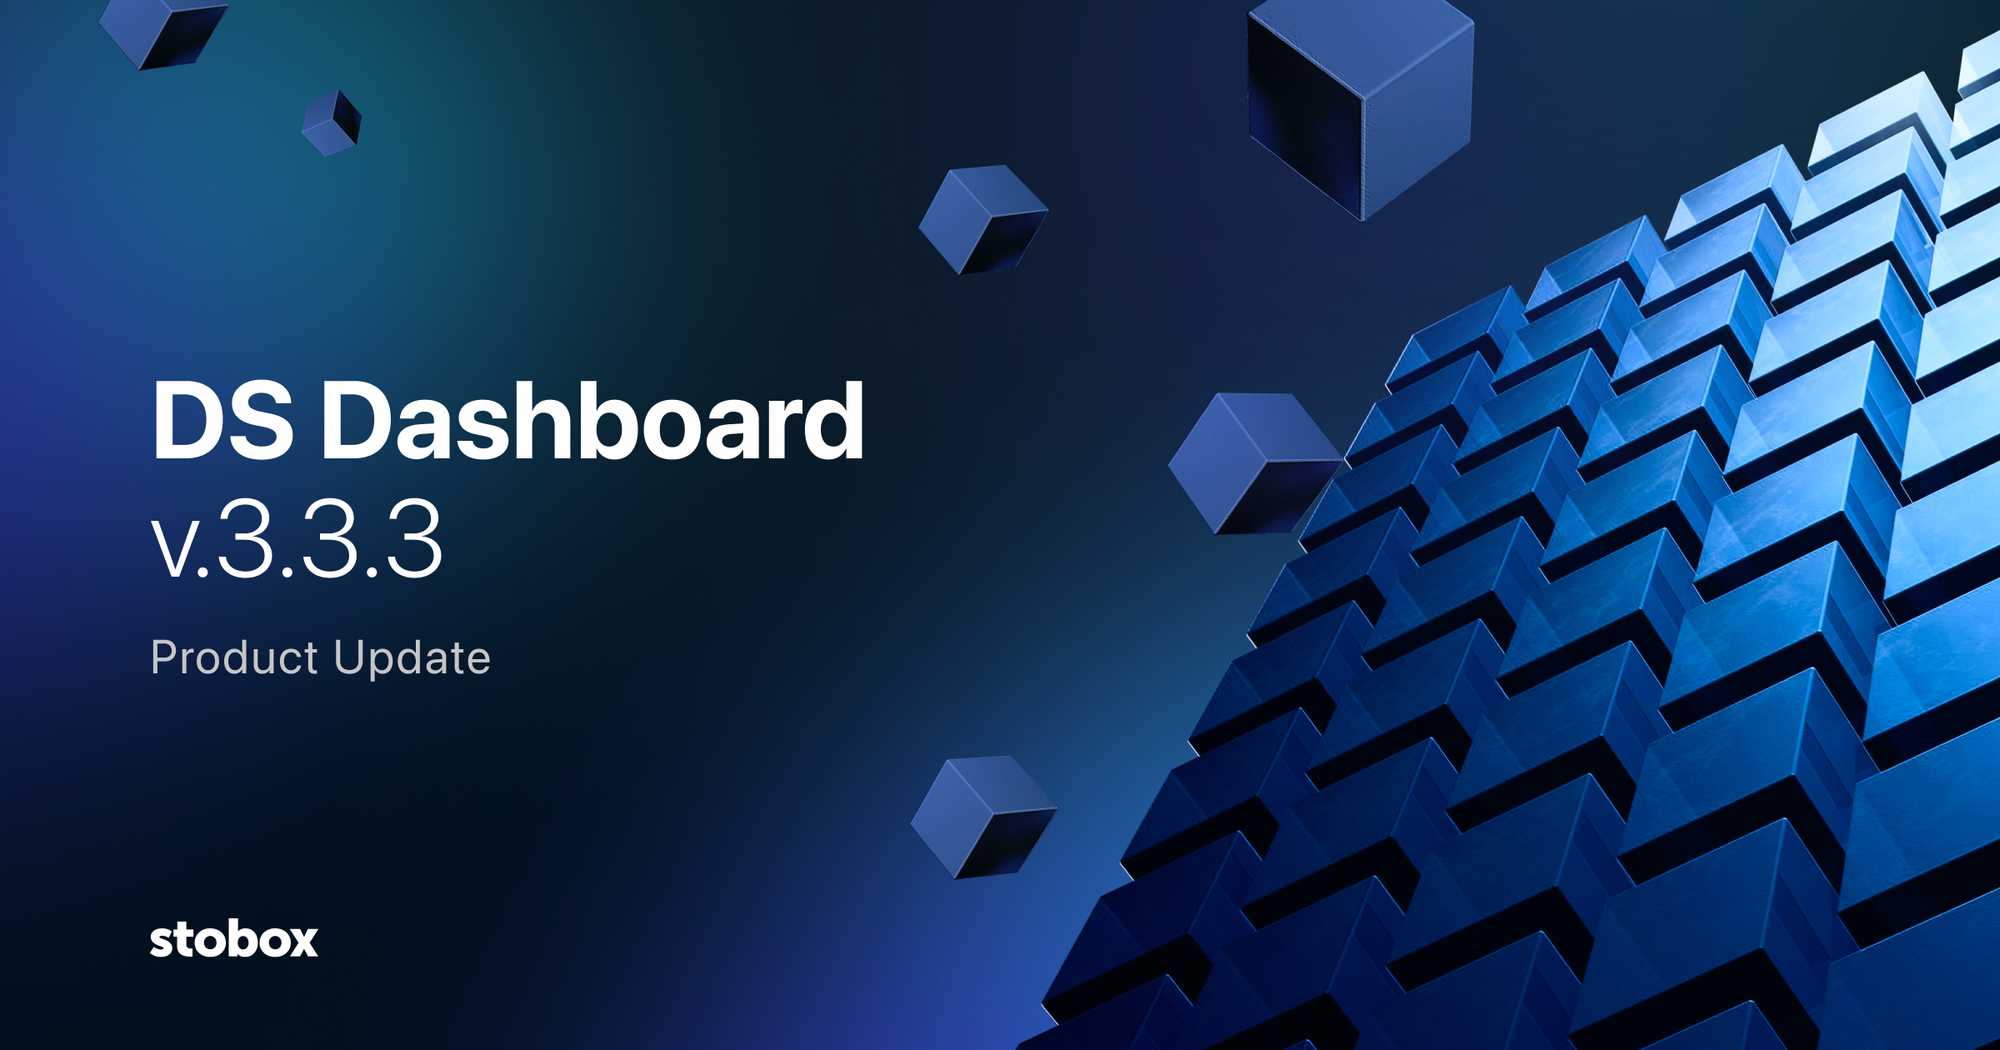 DS Dashboard v.3.3.3 Product Updates